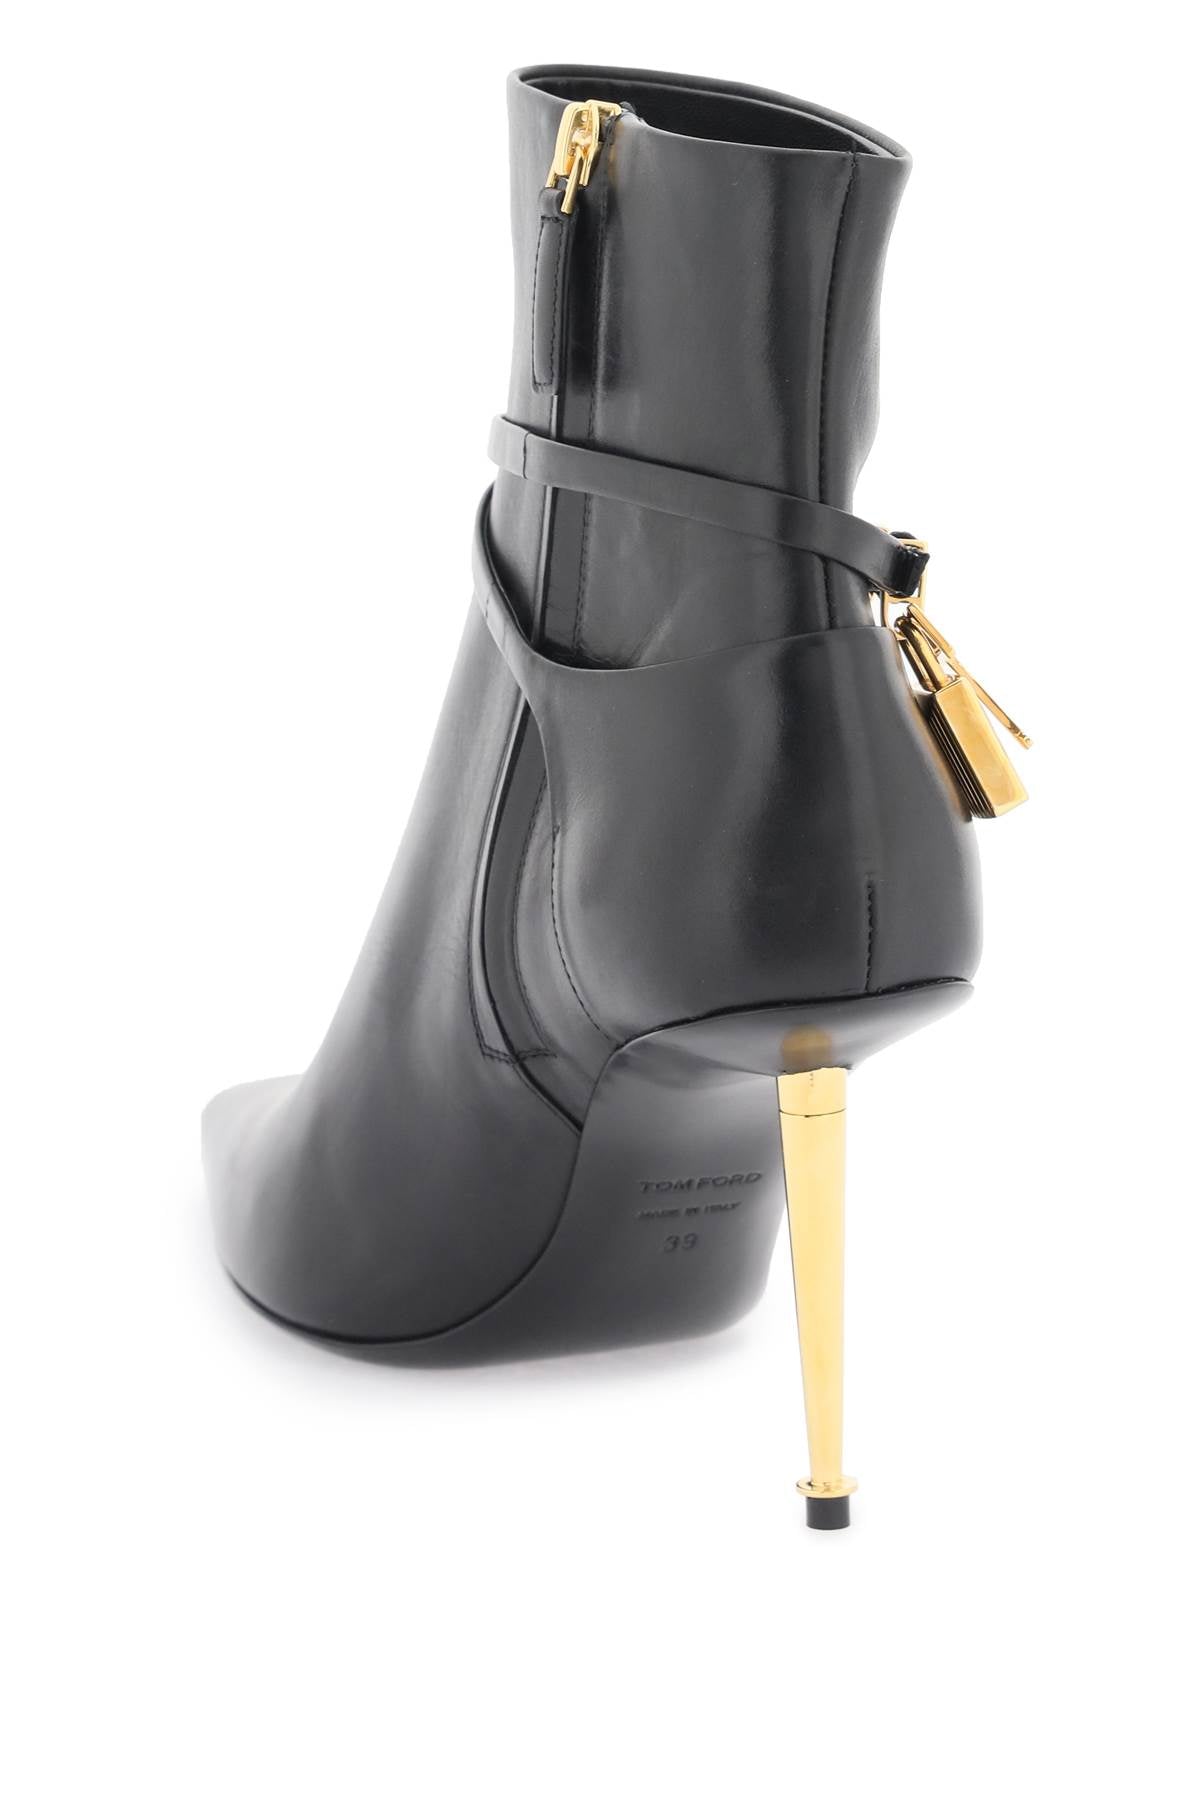 Tom ford leather ankle boots with padlock-2